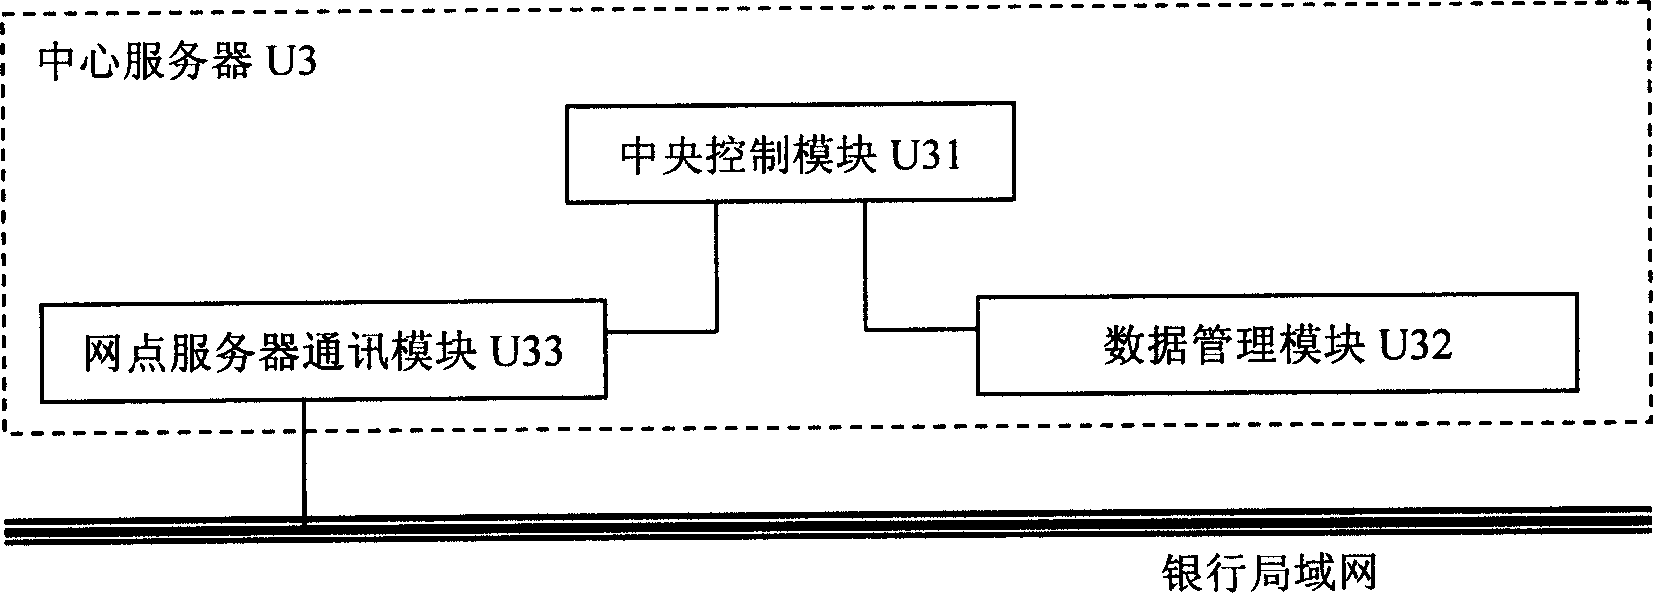 System and method for examining and verifying identifying document of bank depositor